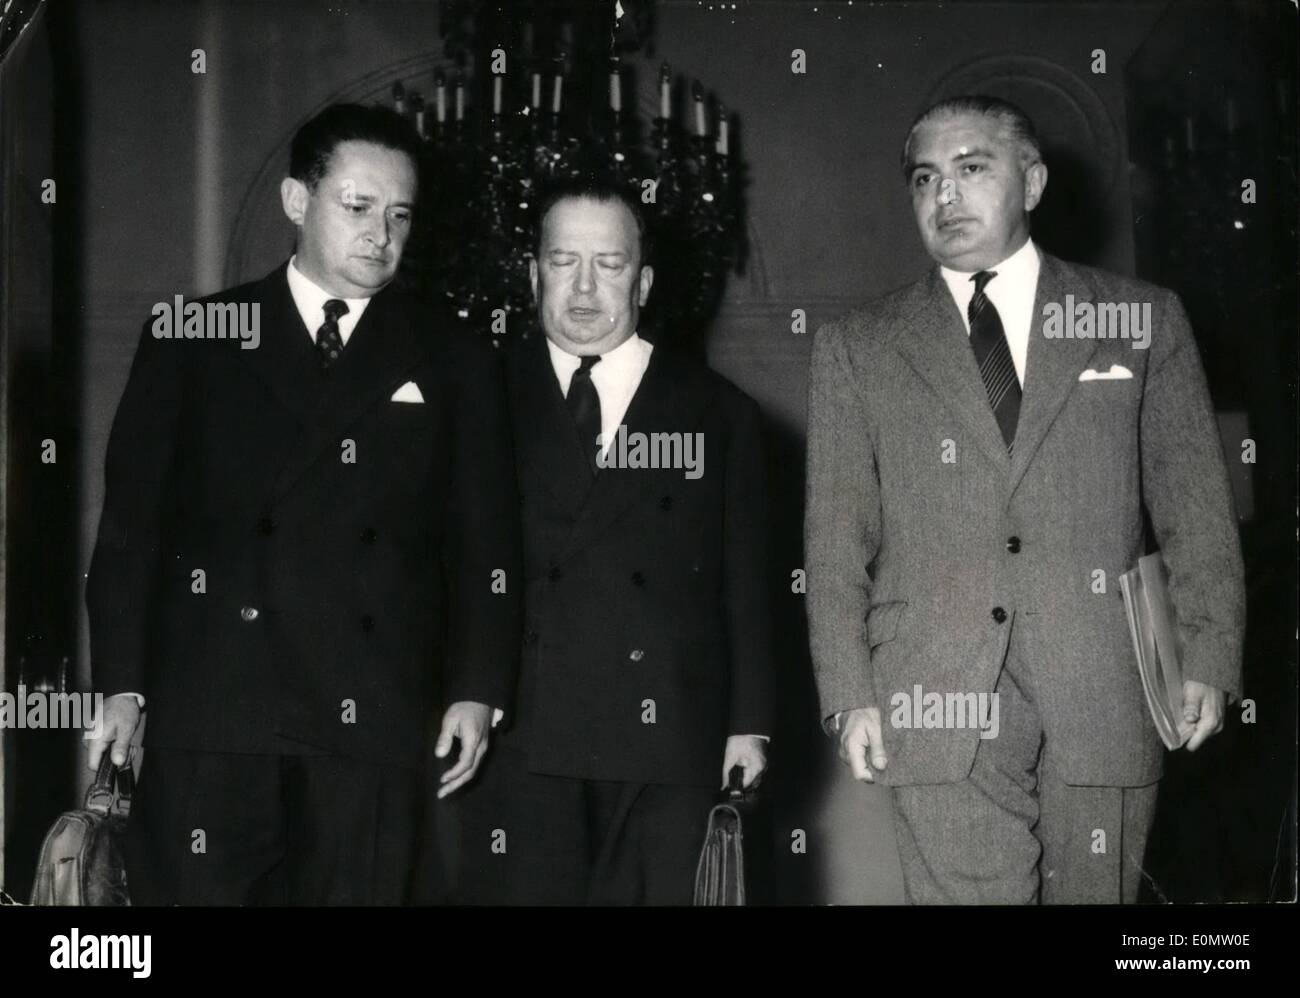 Sep. 09, 1956 - Reservists to be demobbed; Problem discussed at cabinet meeting: The problem of the demobilization of reservists is being discussed at a cabinet meeting at the Elysee Palace today. From left to right: M. Bourges Maunoury, Minister of National Defense, Lacoste, Minister residing in Algeria, and Laforest, Air secretary leaving the Elysee. Stock Photo